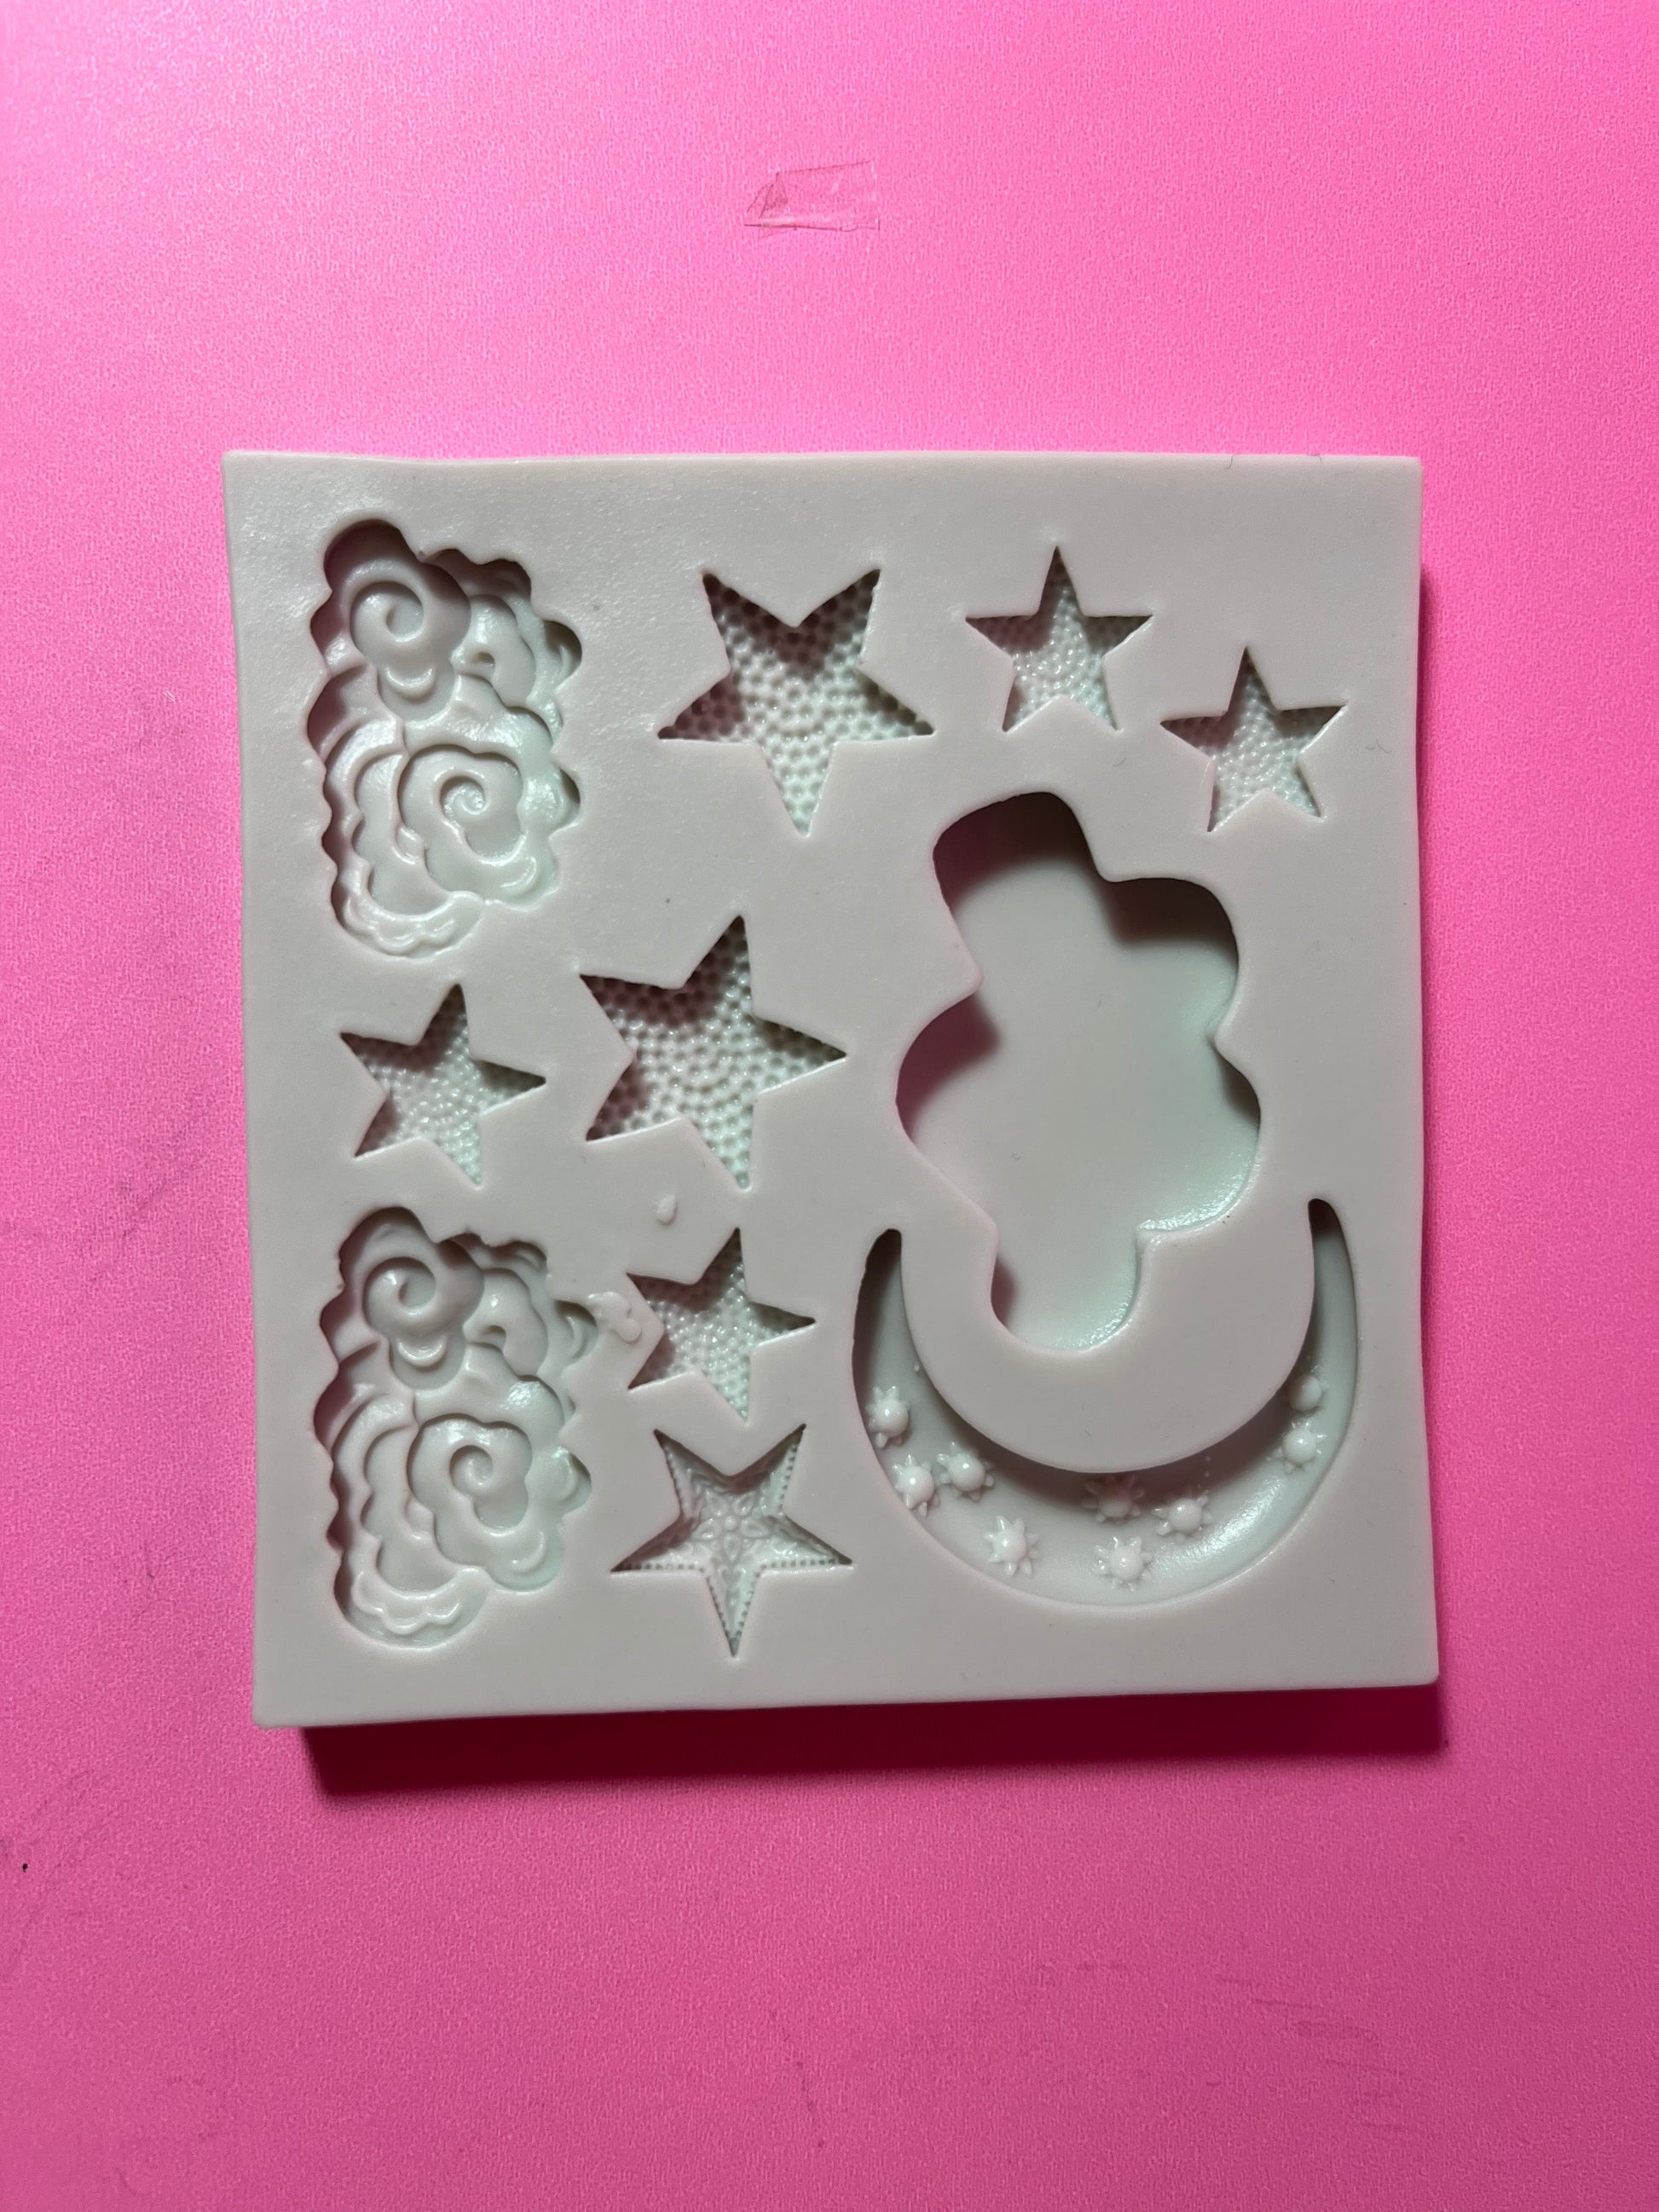 Perfect to make fondant or chocolate decorations.  Decorate your baby cake, space cake, twinkle little star...or any cake and use this silicone mold with stars clouds and moon.